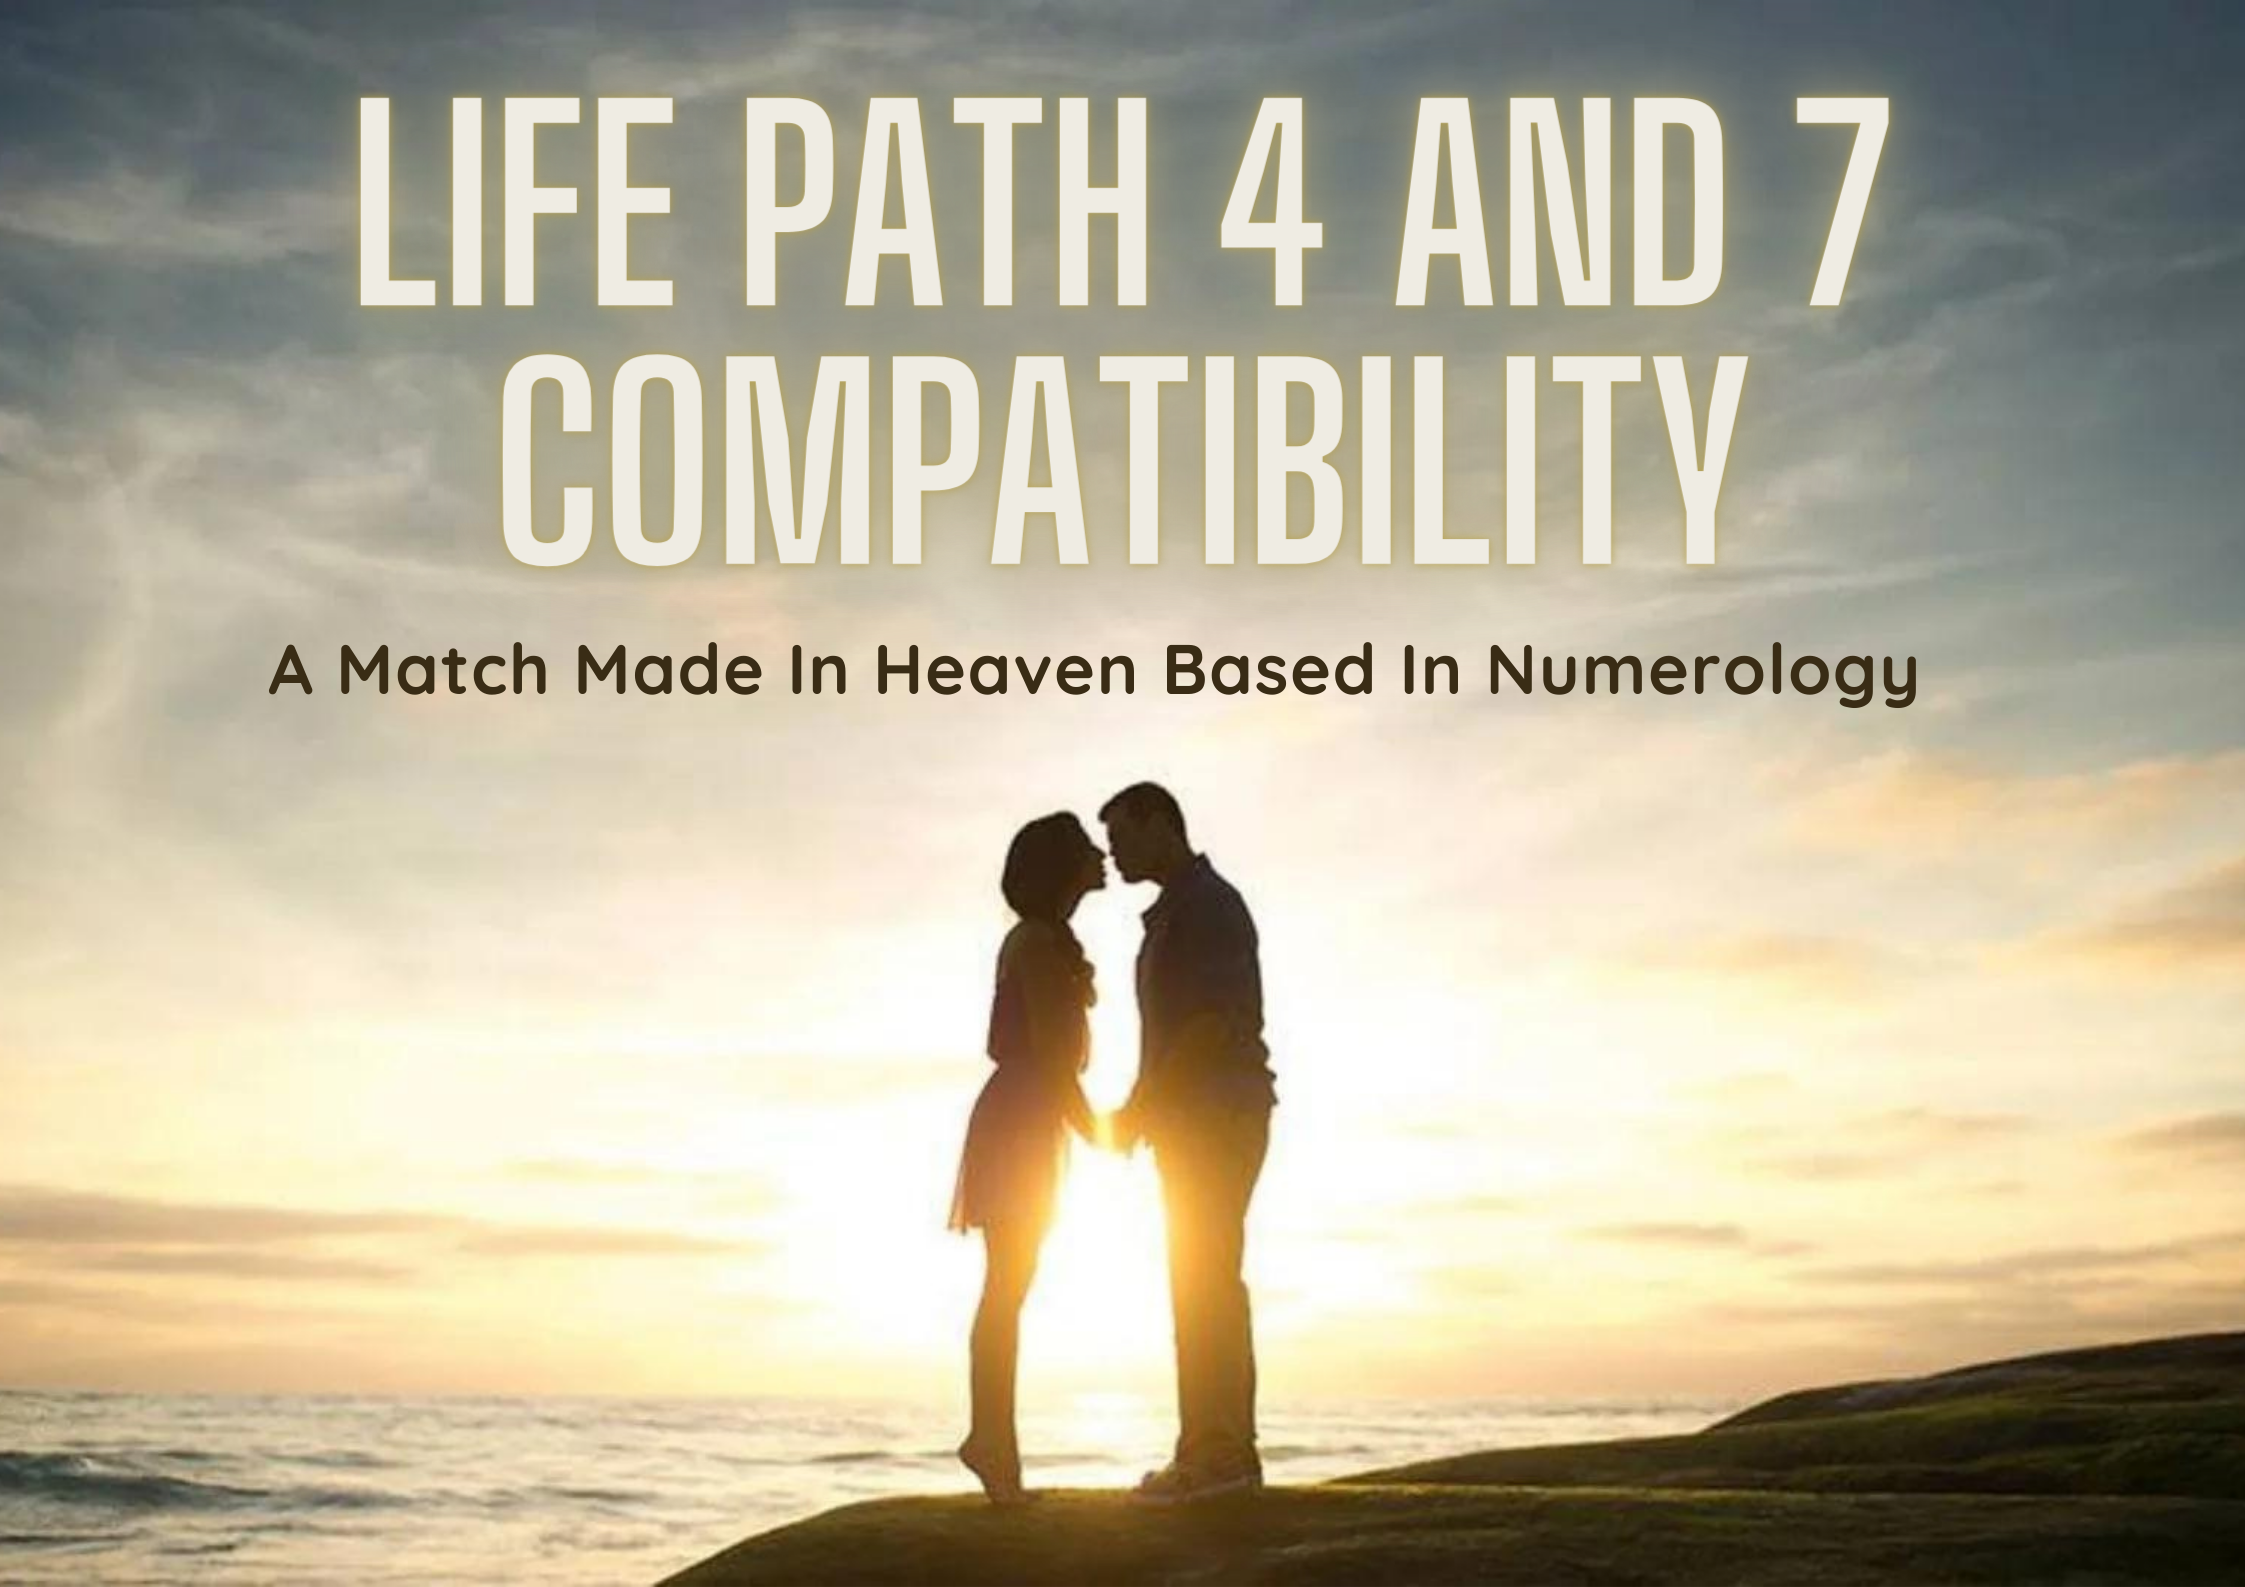 Life Path 4 And 7 Compatibility - A Match Made In Heaven Based In Numerology